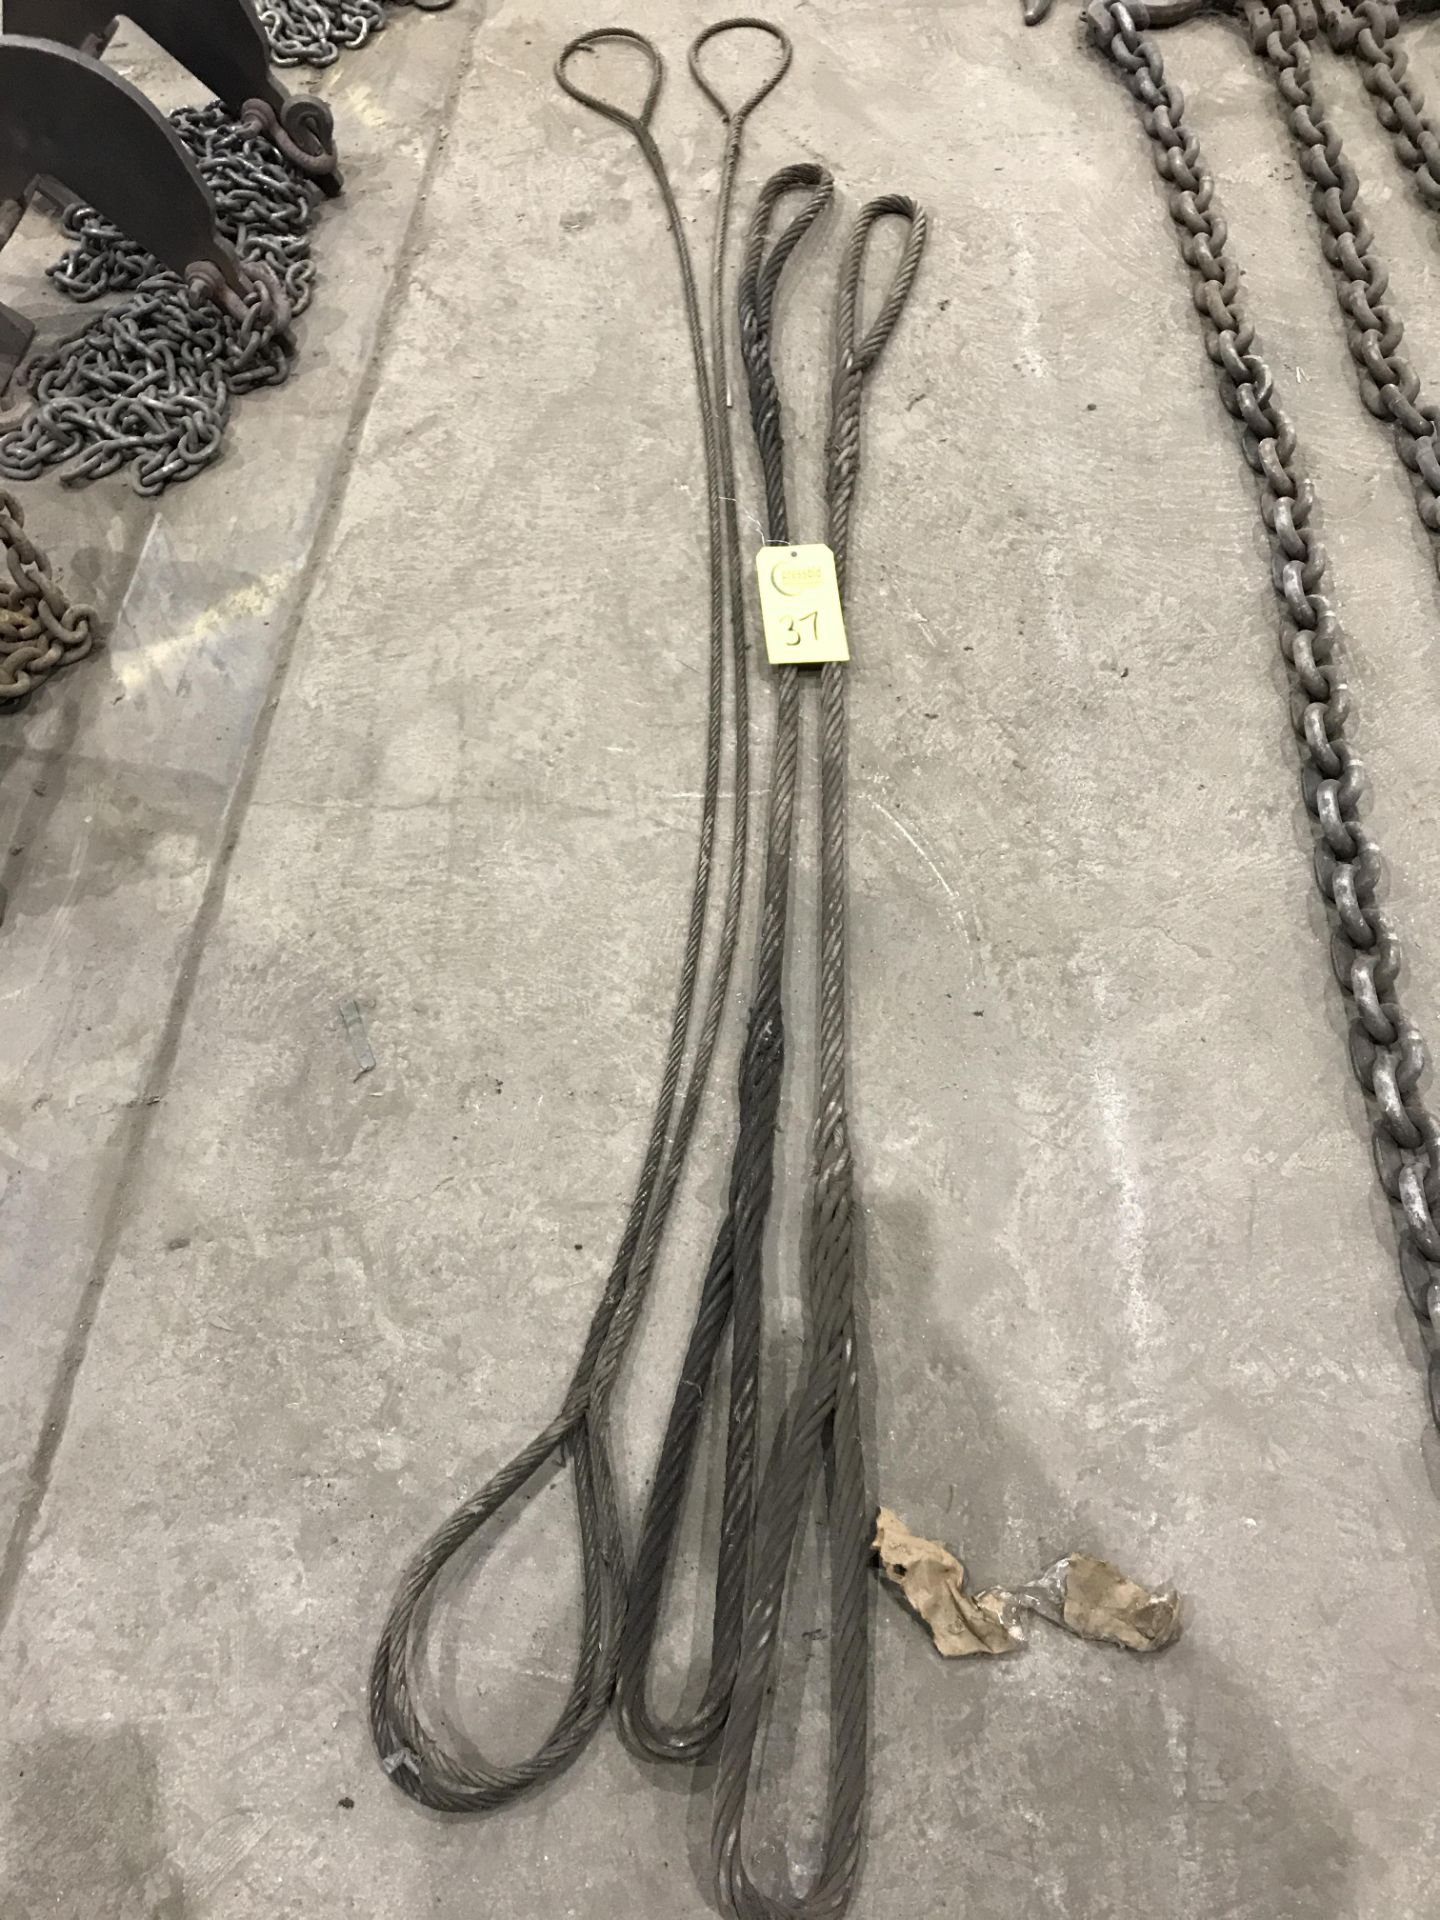 (4) wire ropes with loops